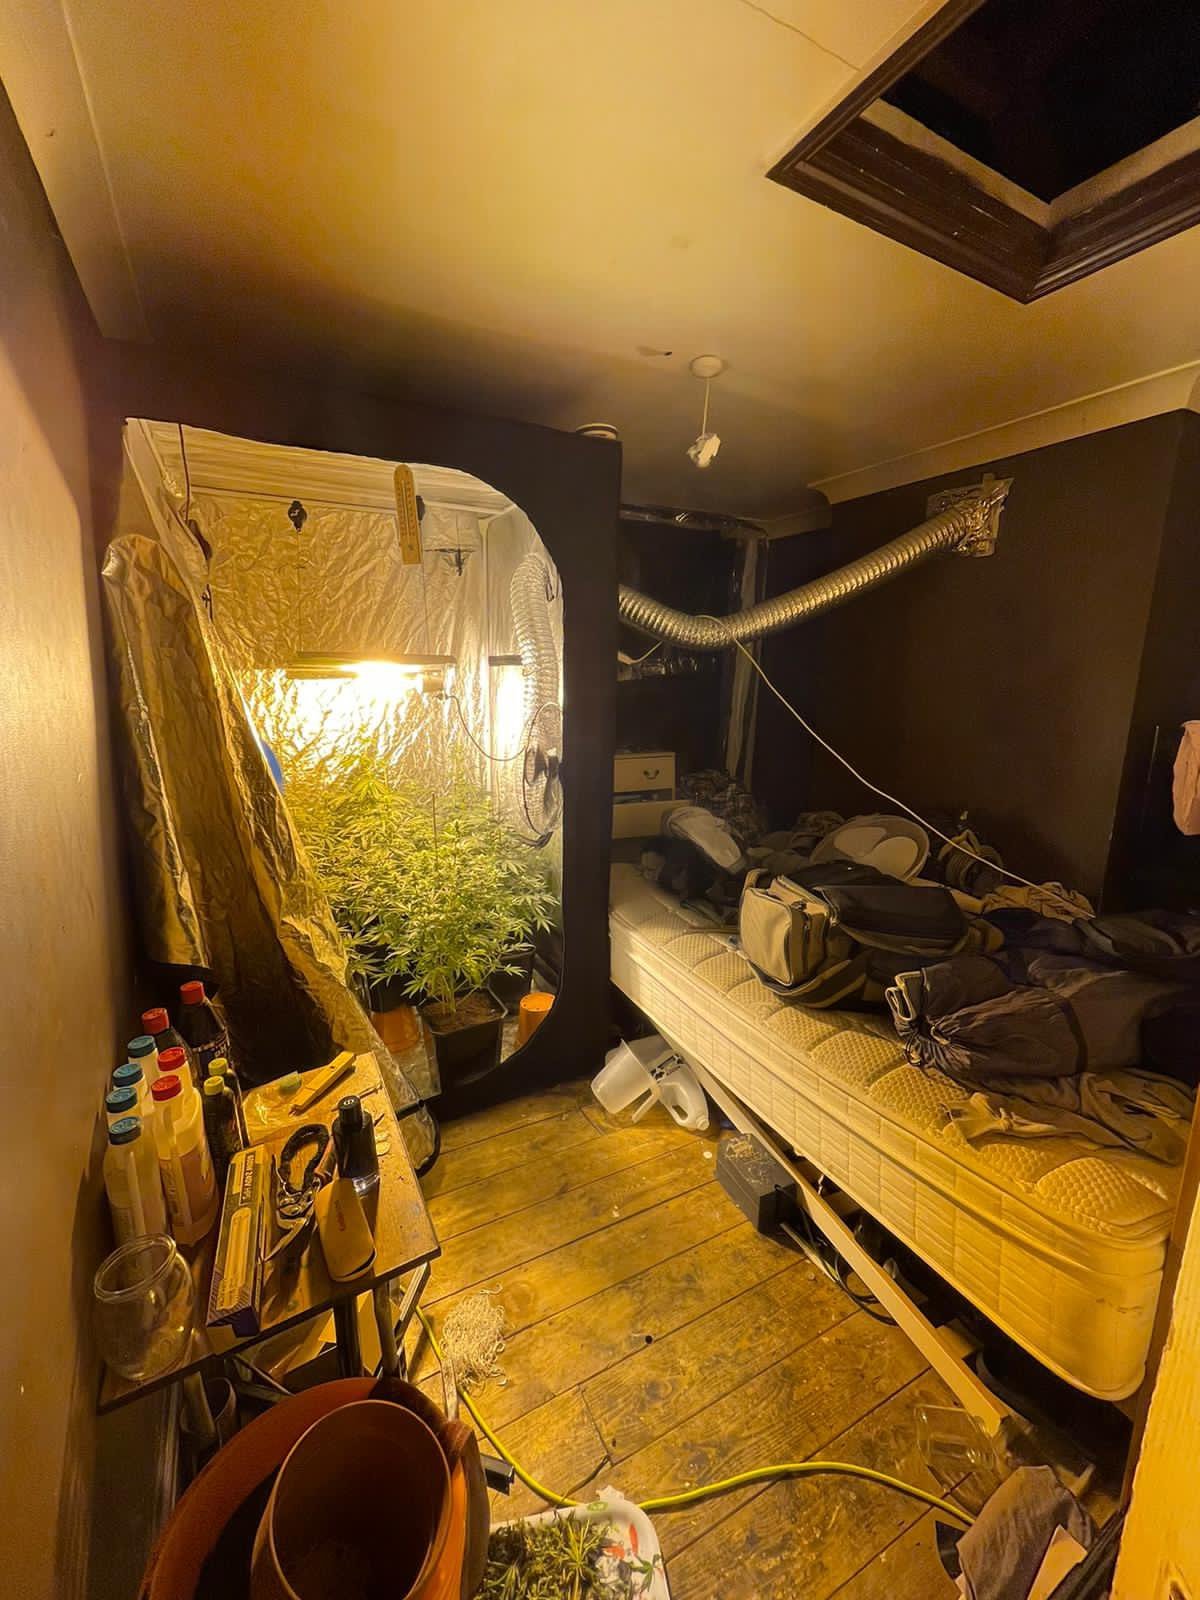 Cannabis grown inside a property on the Greenwich Peninsula